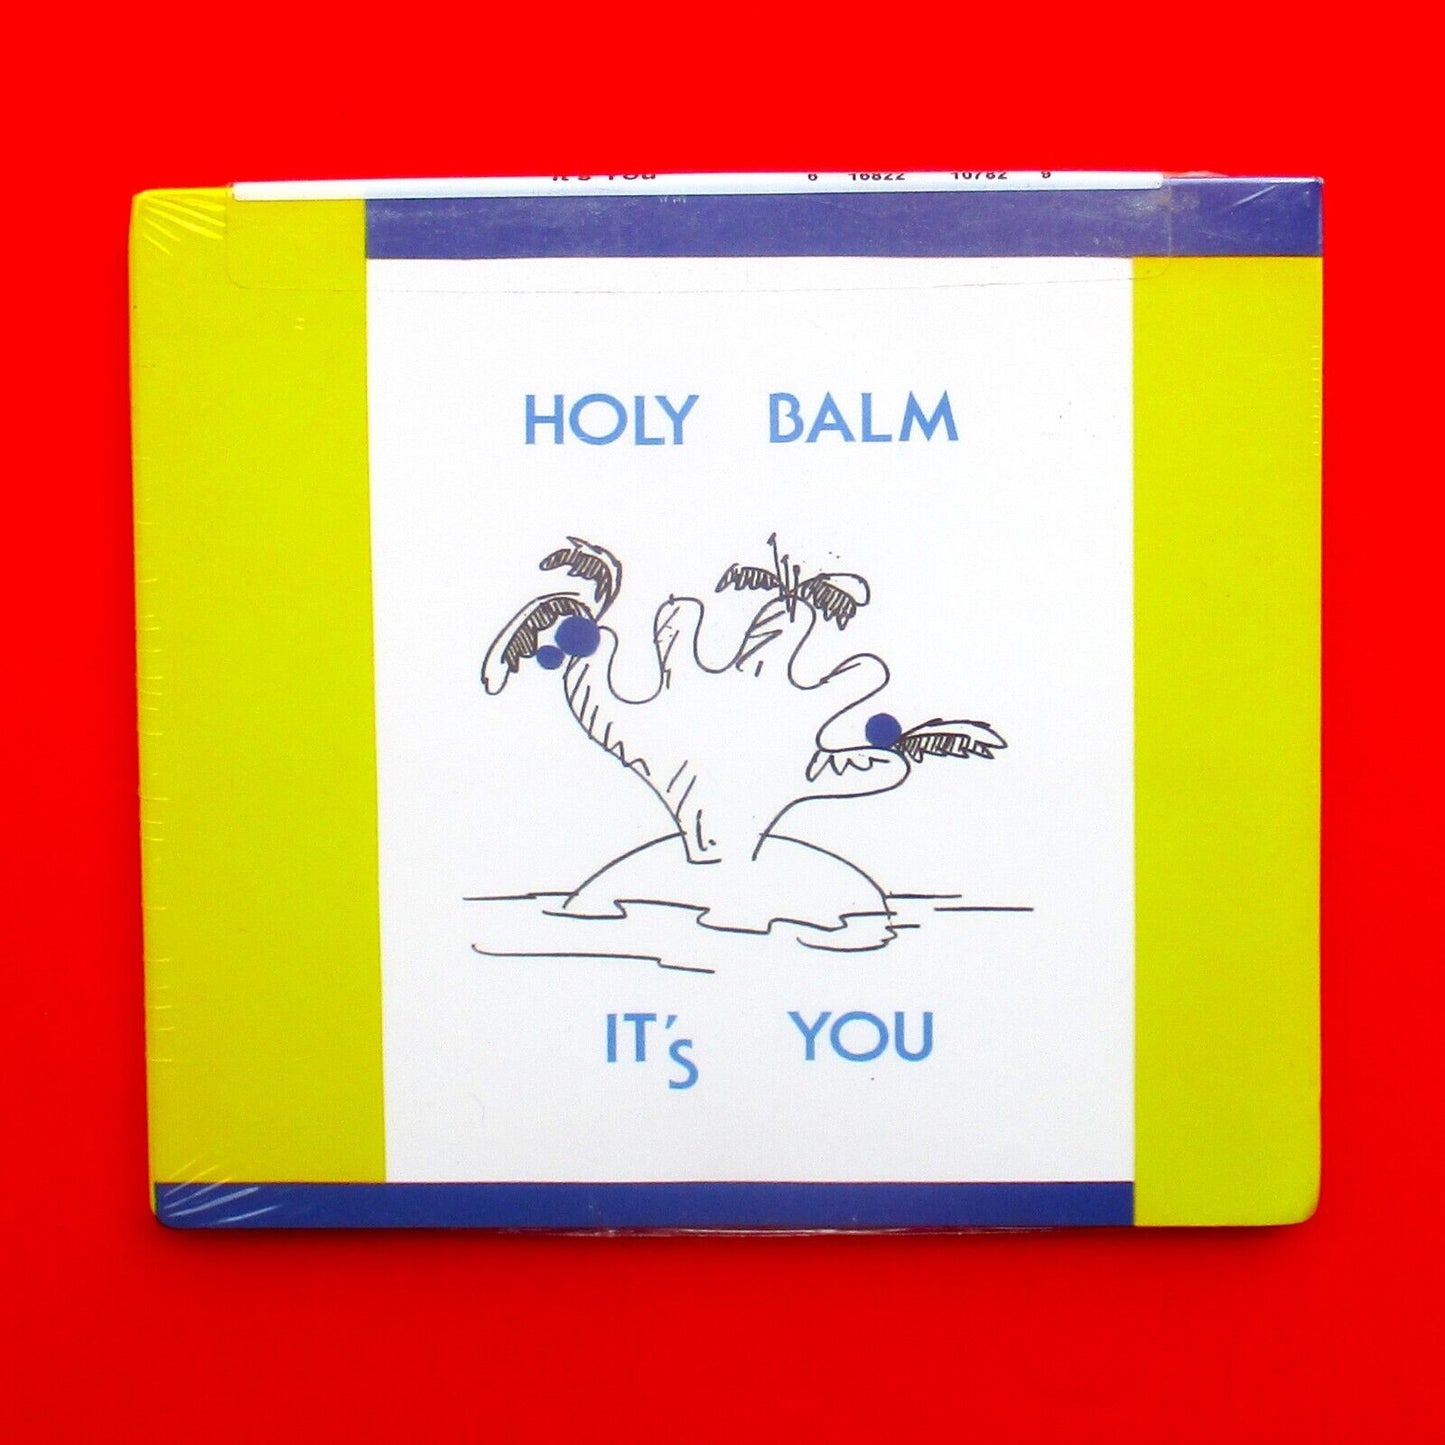 Holy Balm ‎It's You 2012 CD Album US Factory Sealed